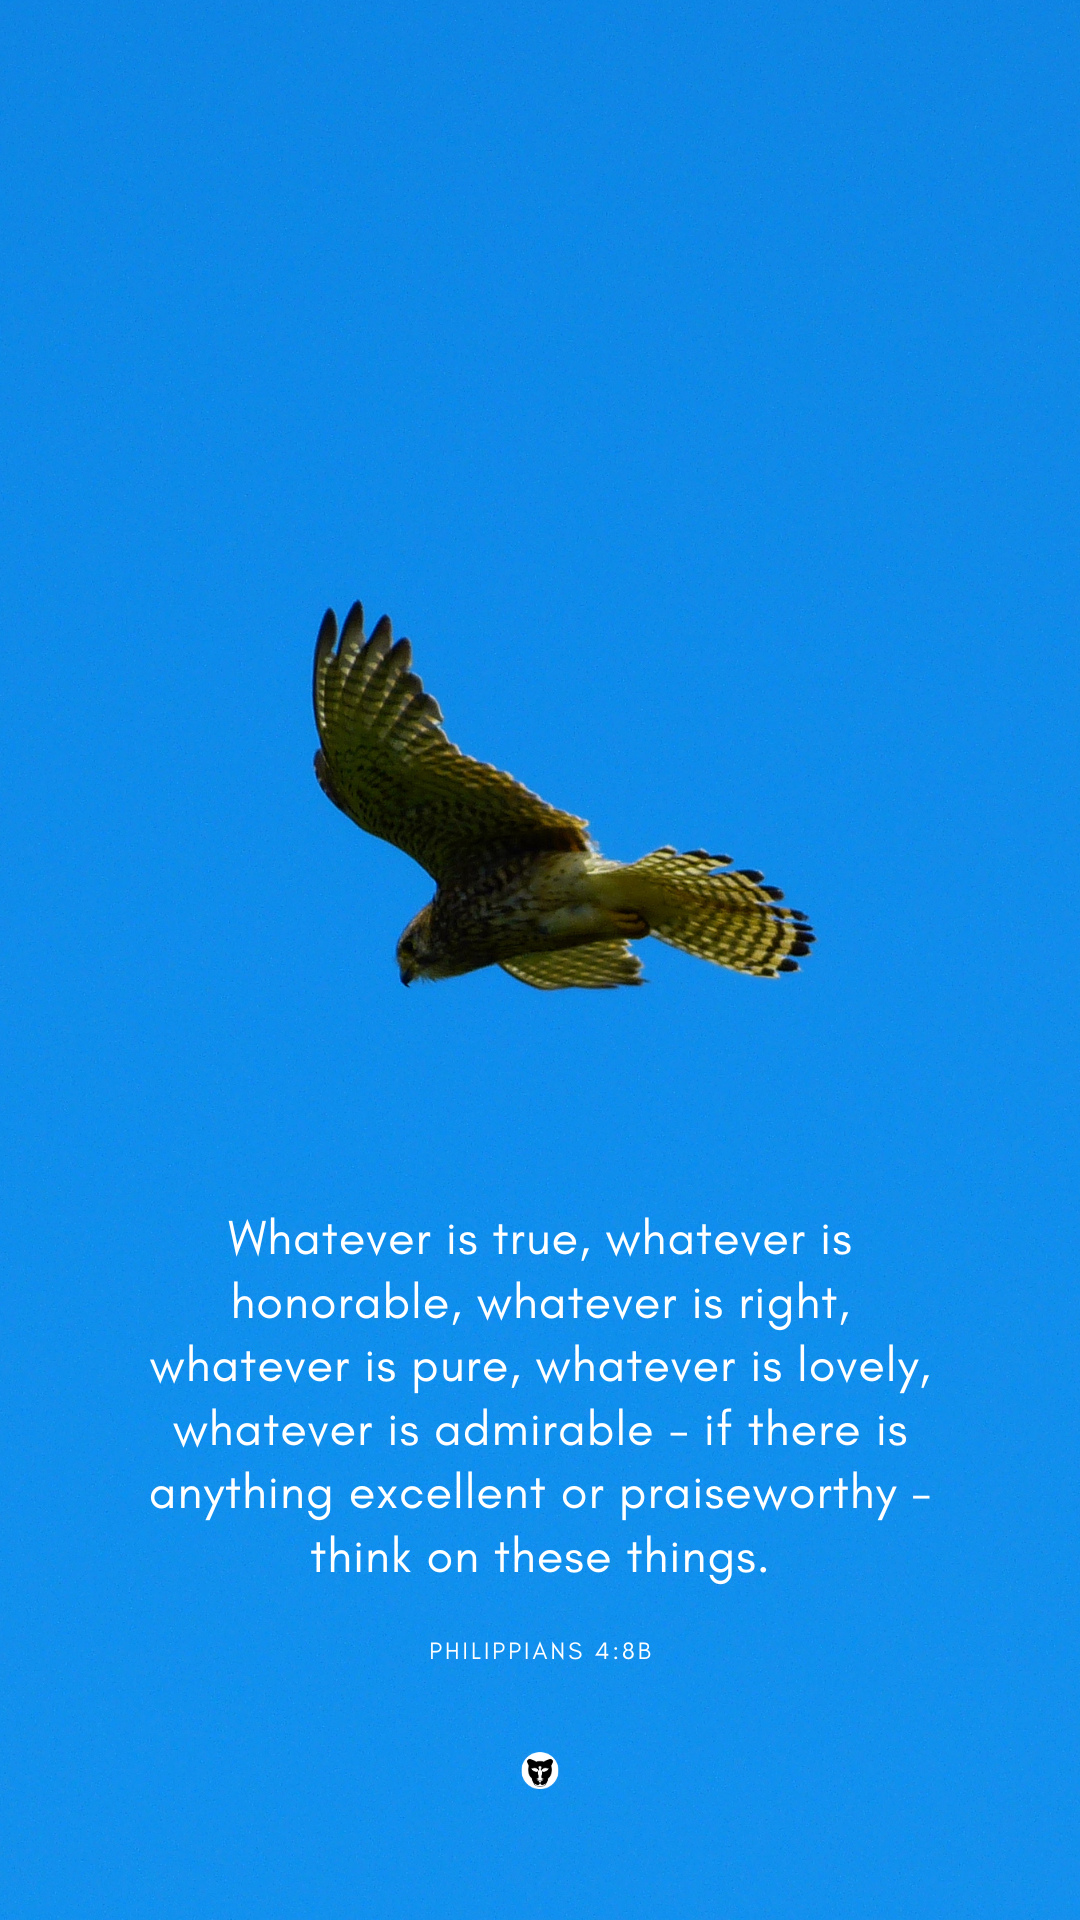 Philippians 4:8 eagle in the sky wallpaper